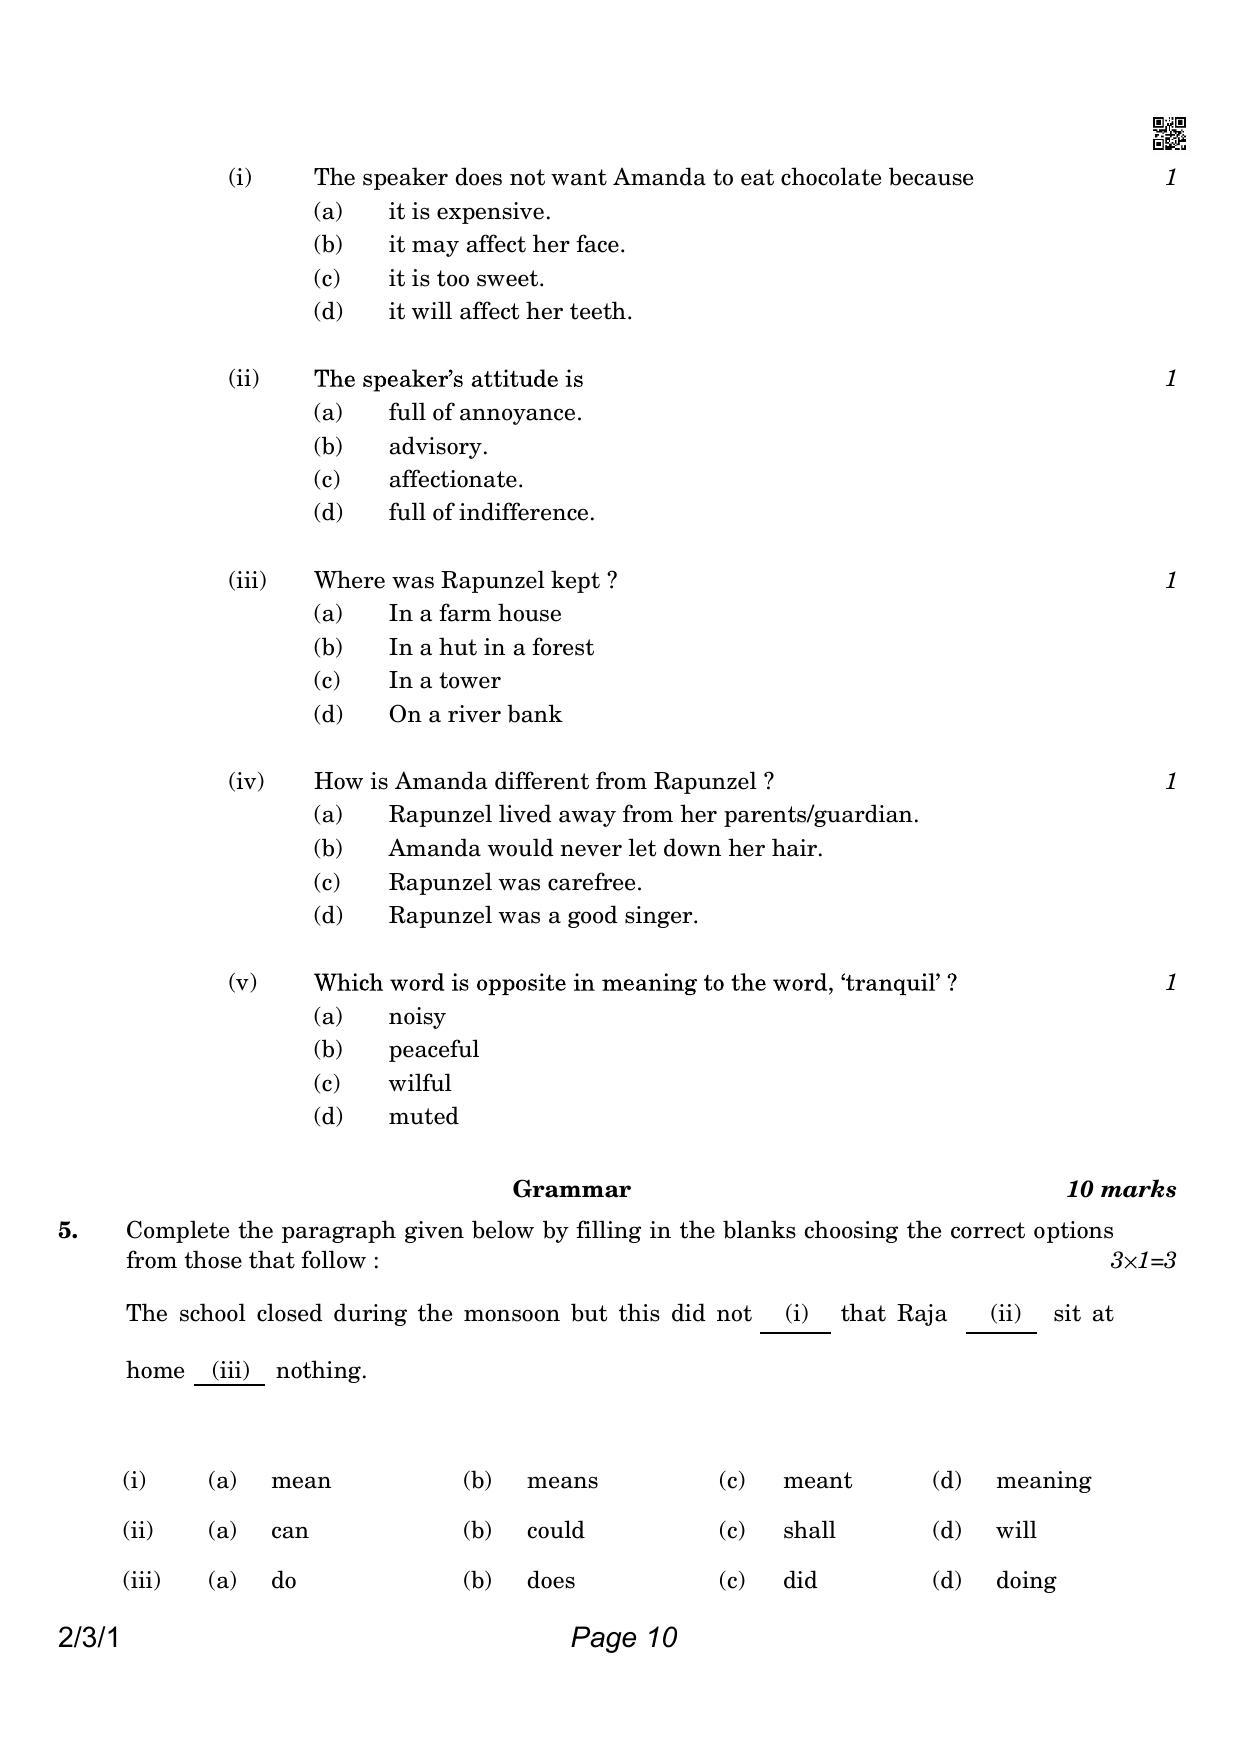 CBSE Class 10 QP_184_ENGLISH_LANGUAGE_AND_LITERATURE 2021 Compartment Question Paper - Page 10